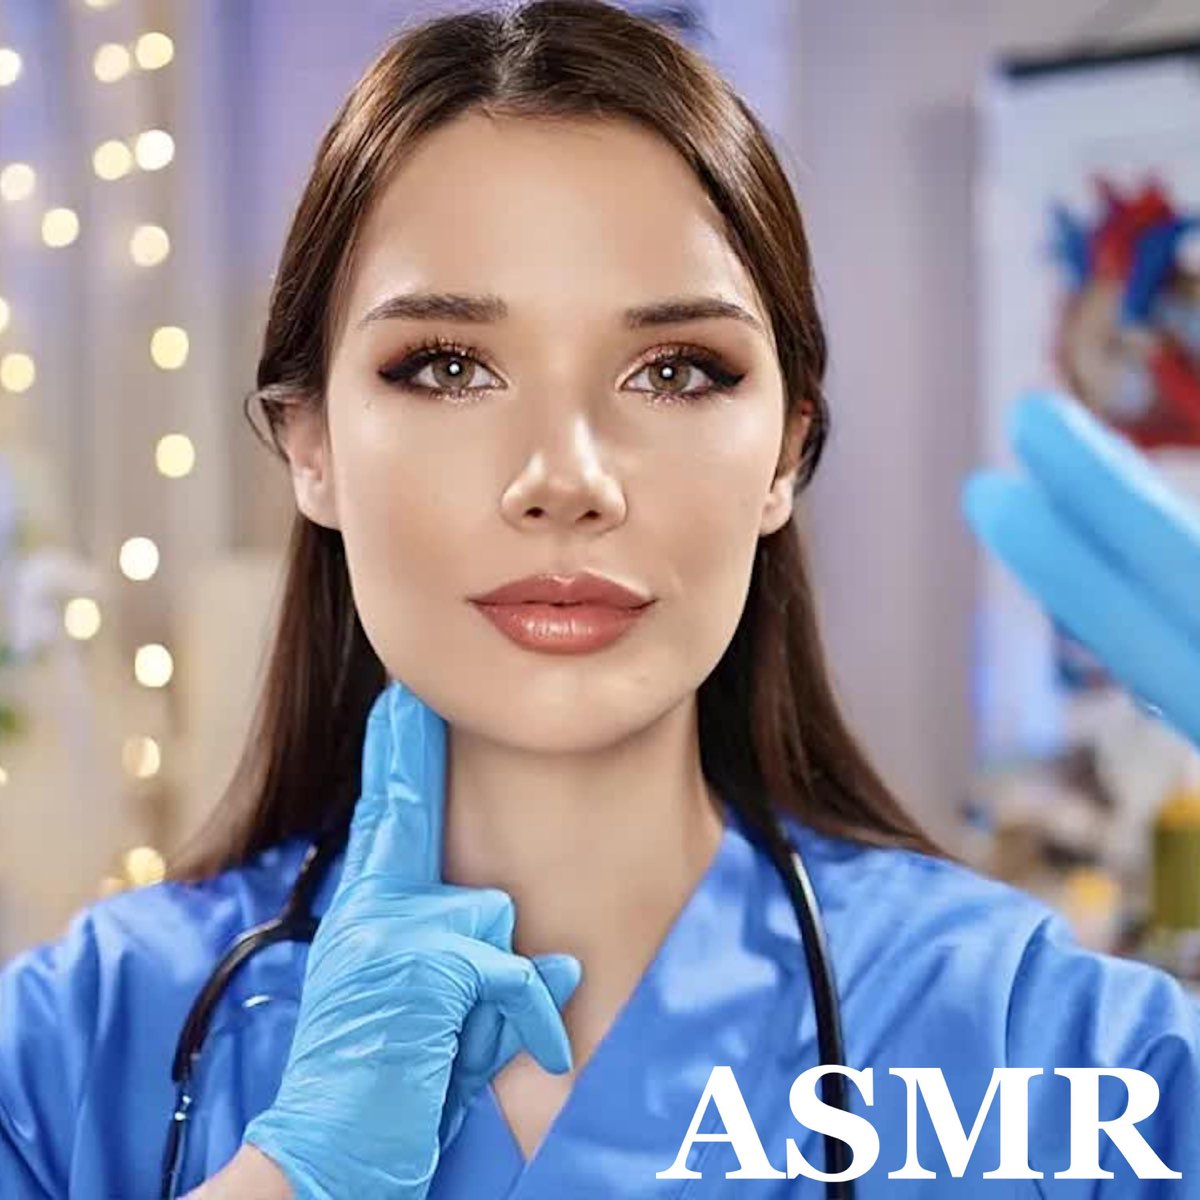 ‎Cranial Nerve Exam by Starling ASMR on Apple Music